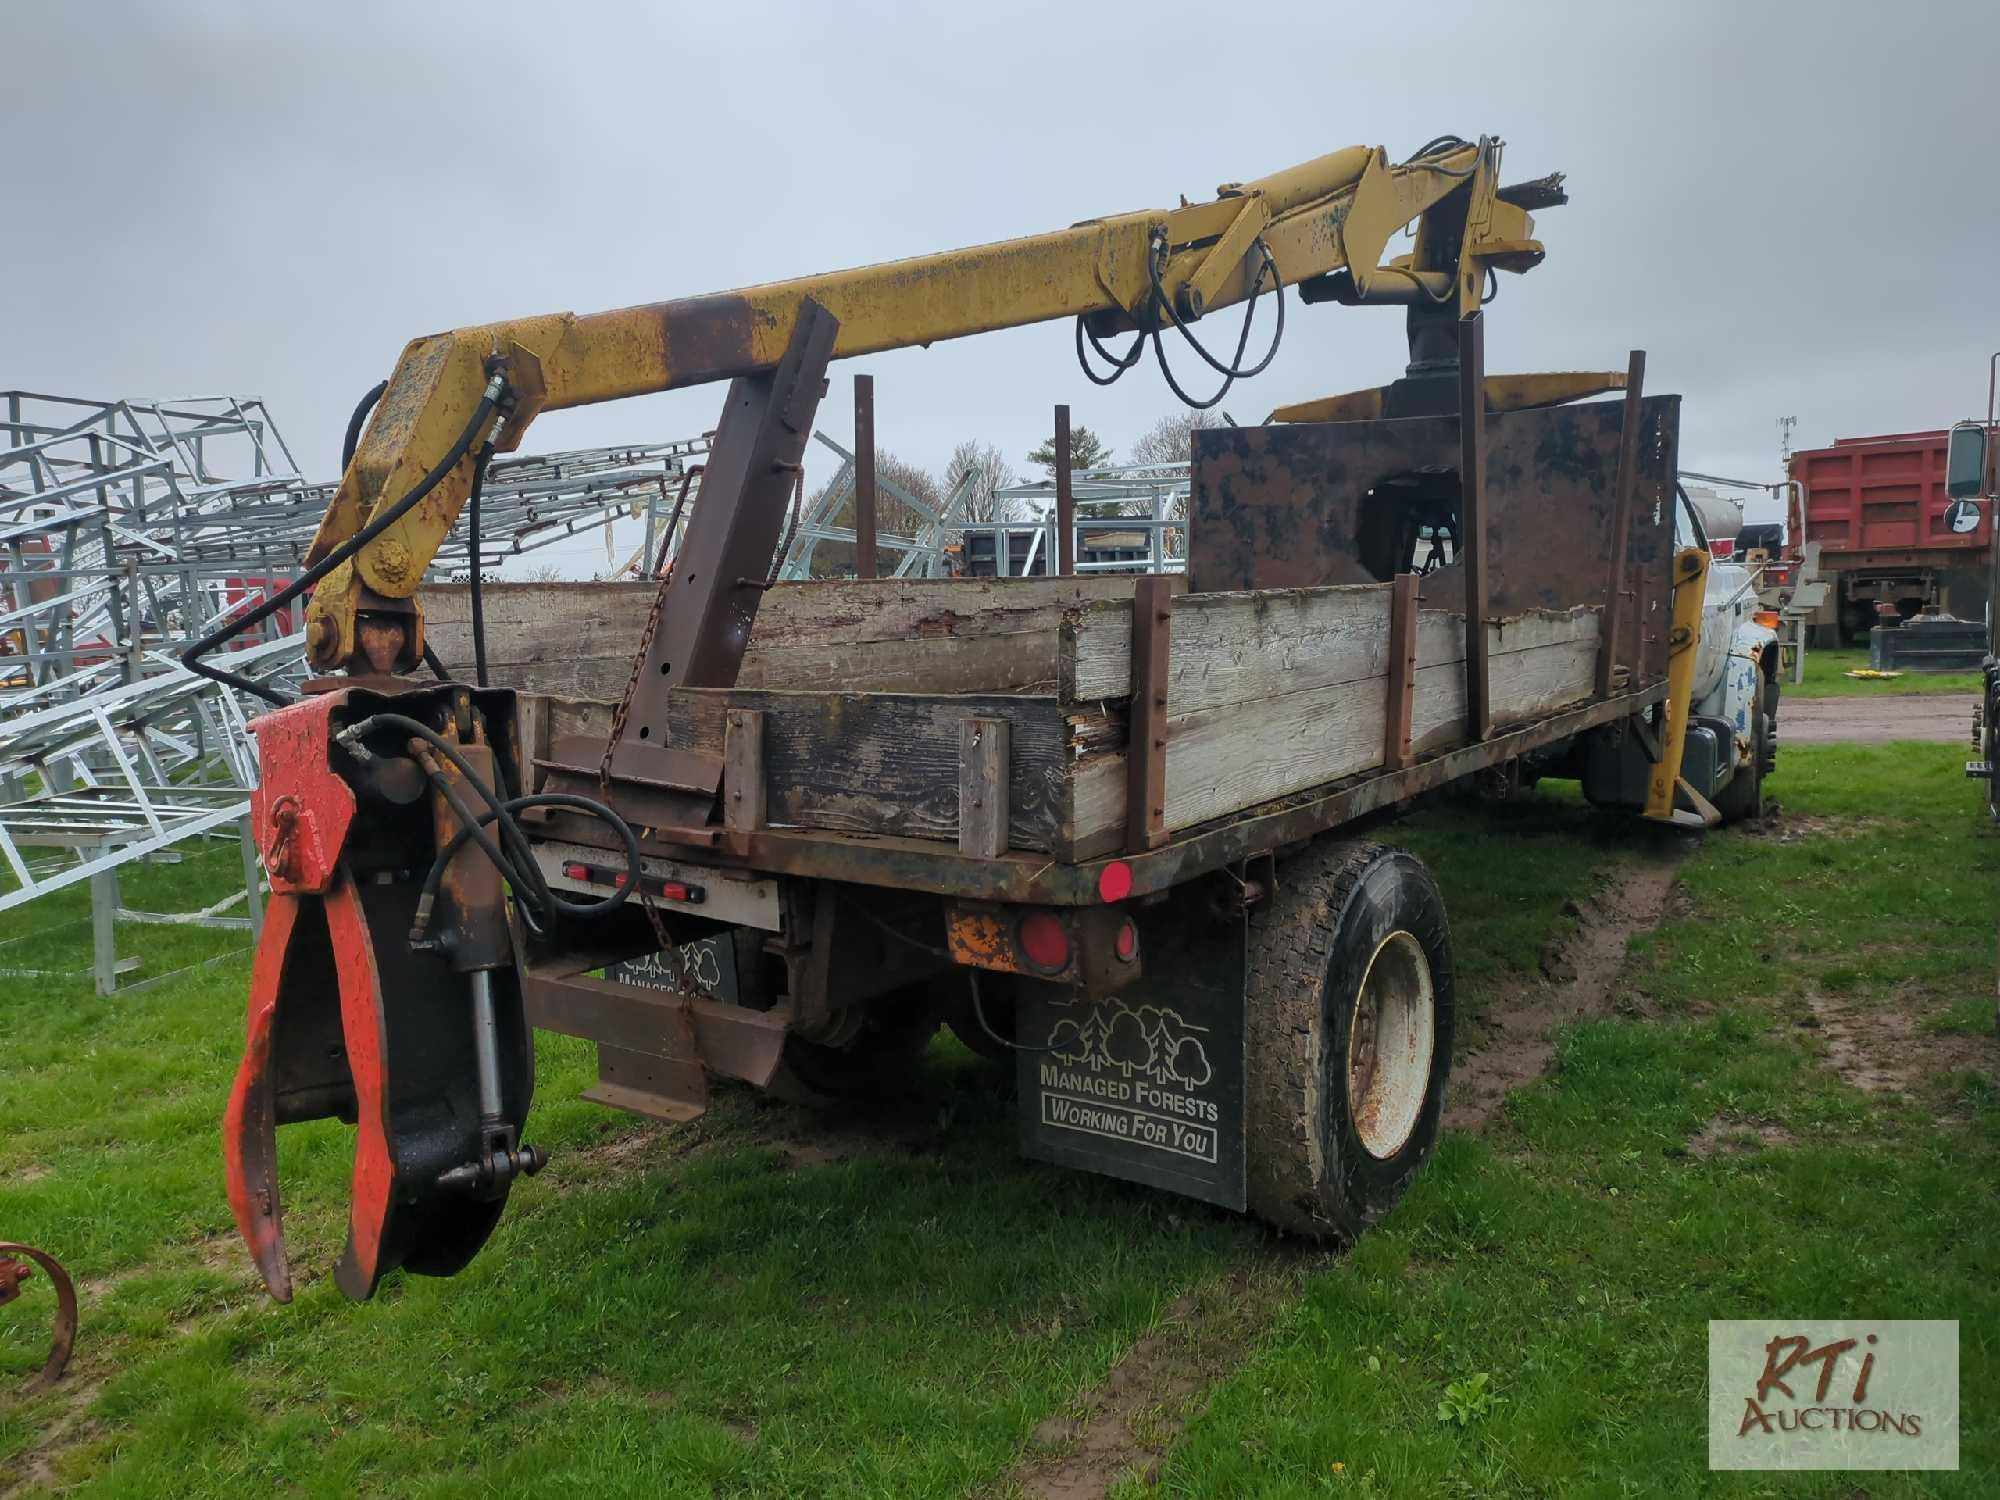 Chevy 7000 single axle flatbed grapple truck, with John Deere log grapple, outriggers, 5-speed